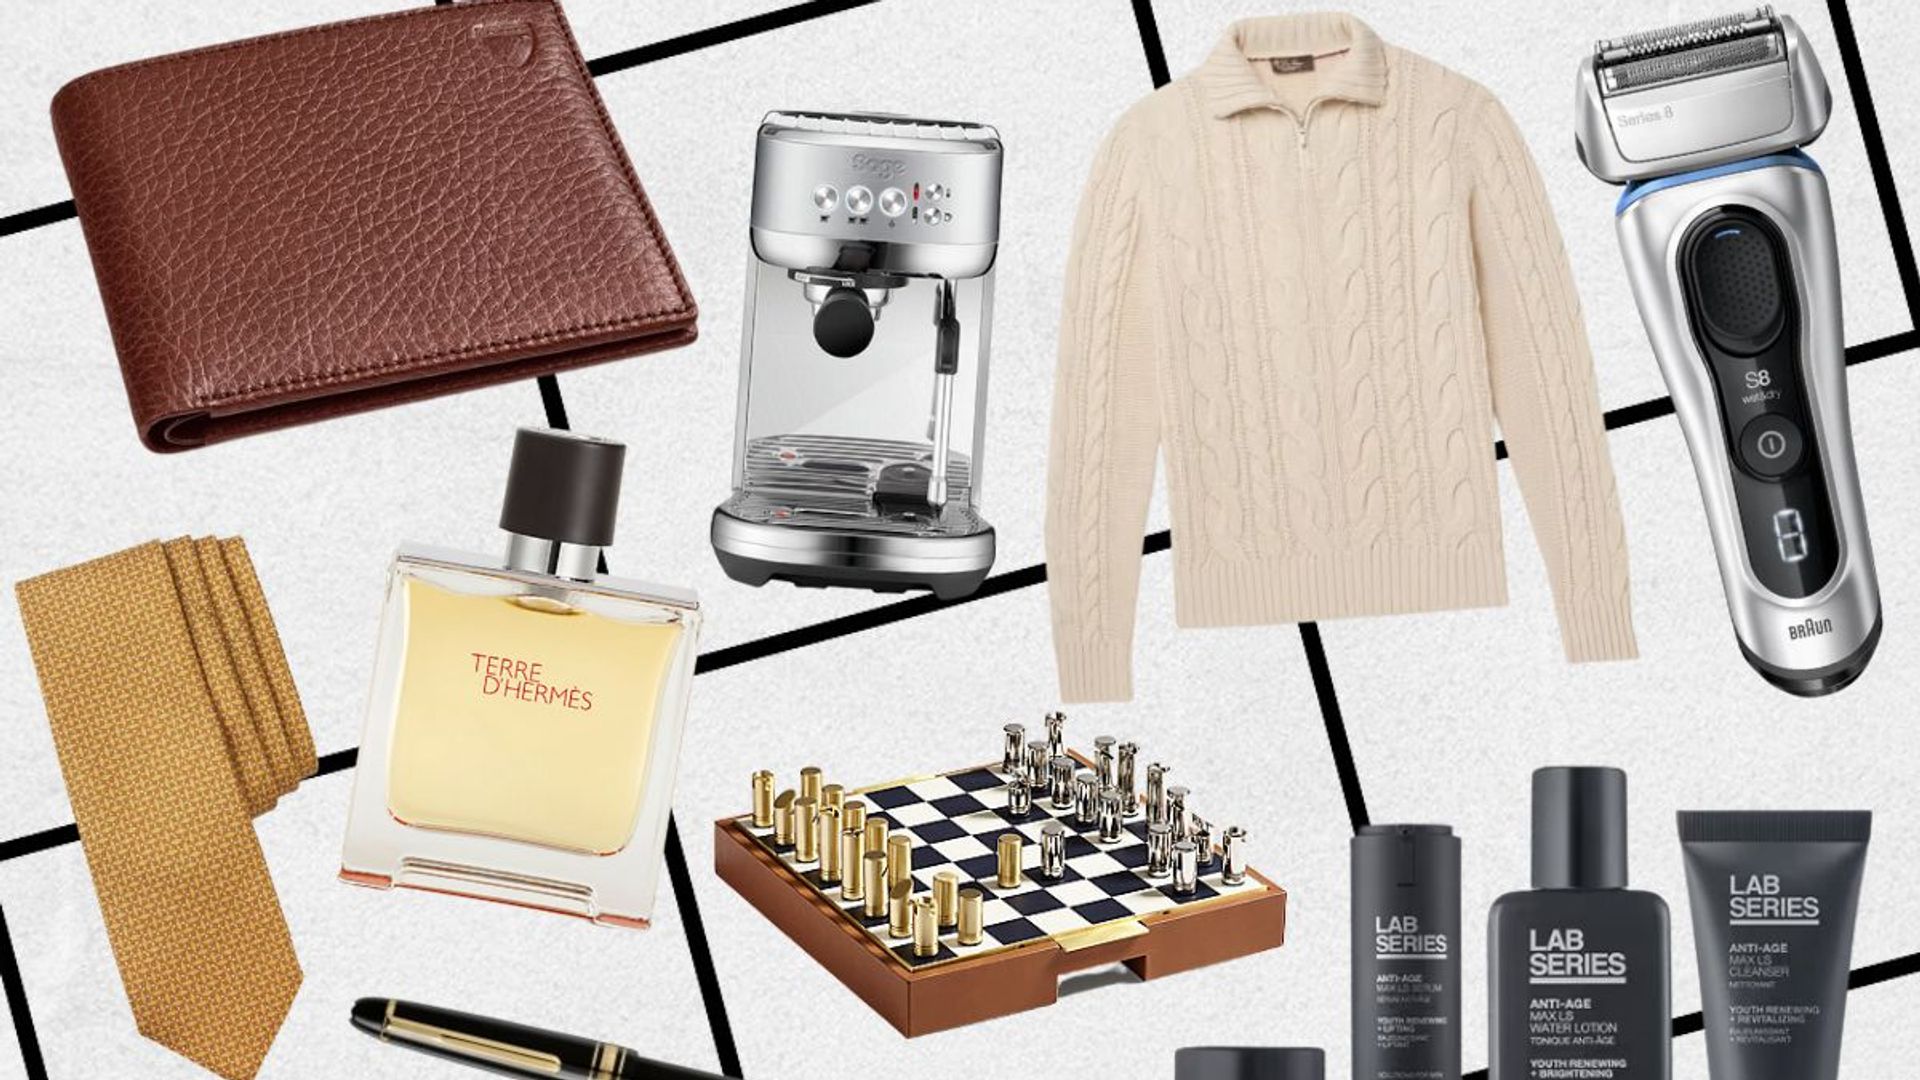 Father's Day gifts including a cream knitted jumper, a shaver, a chess set, a fragrance, a tie, a wallet.